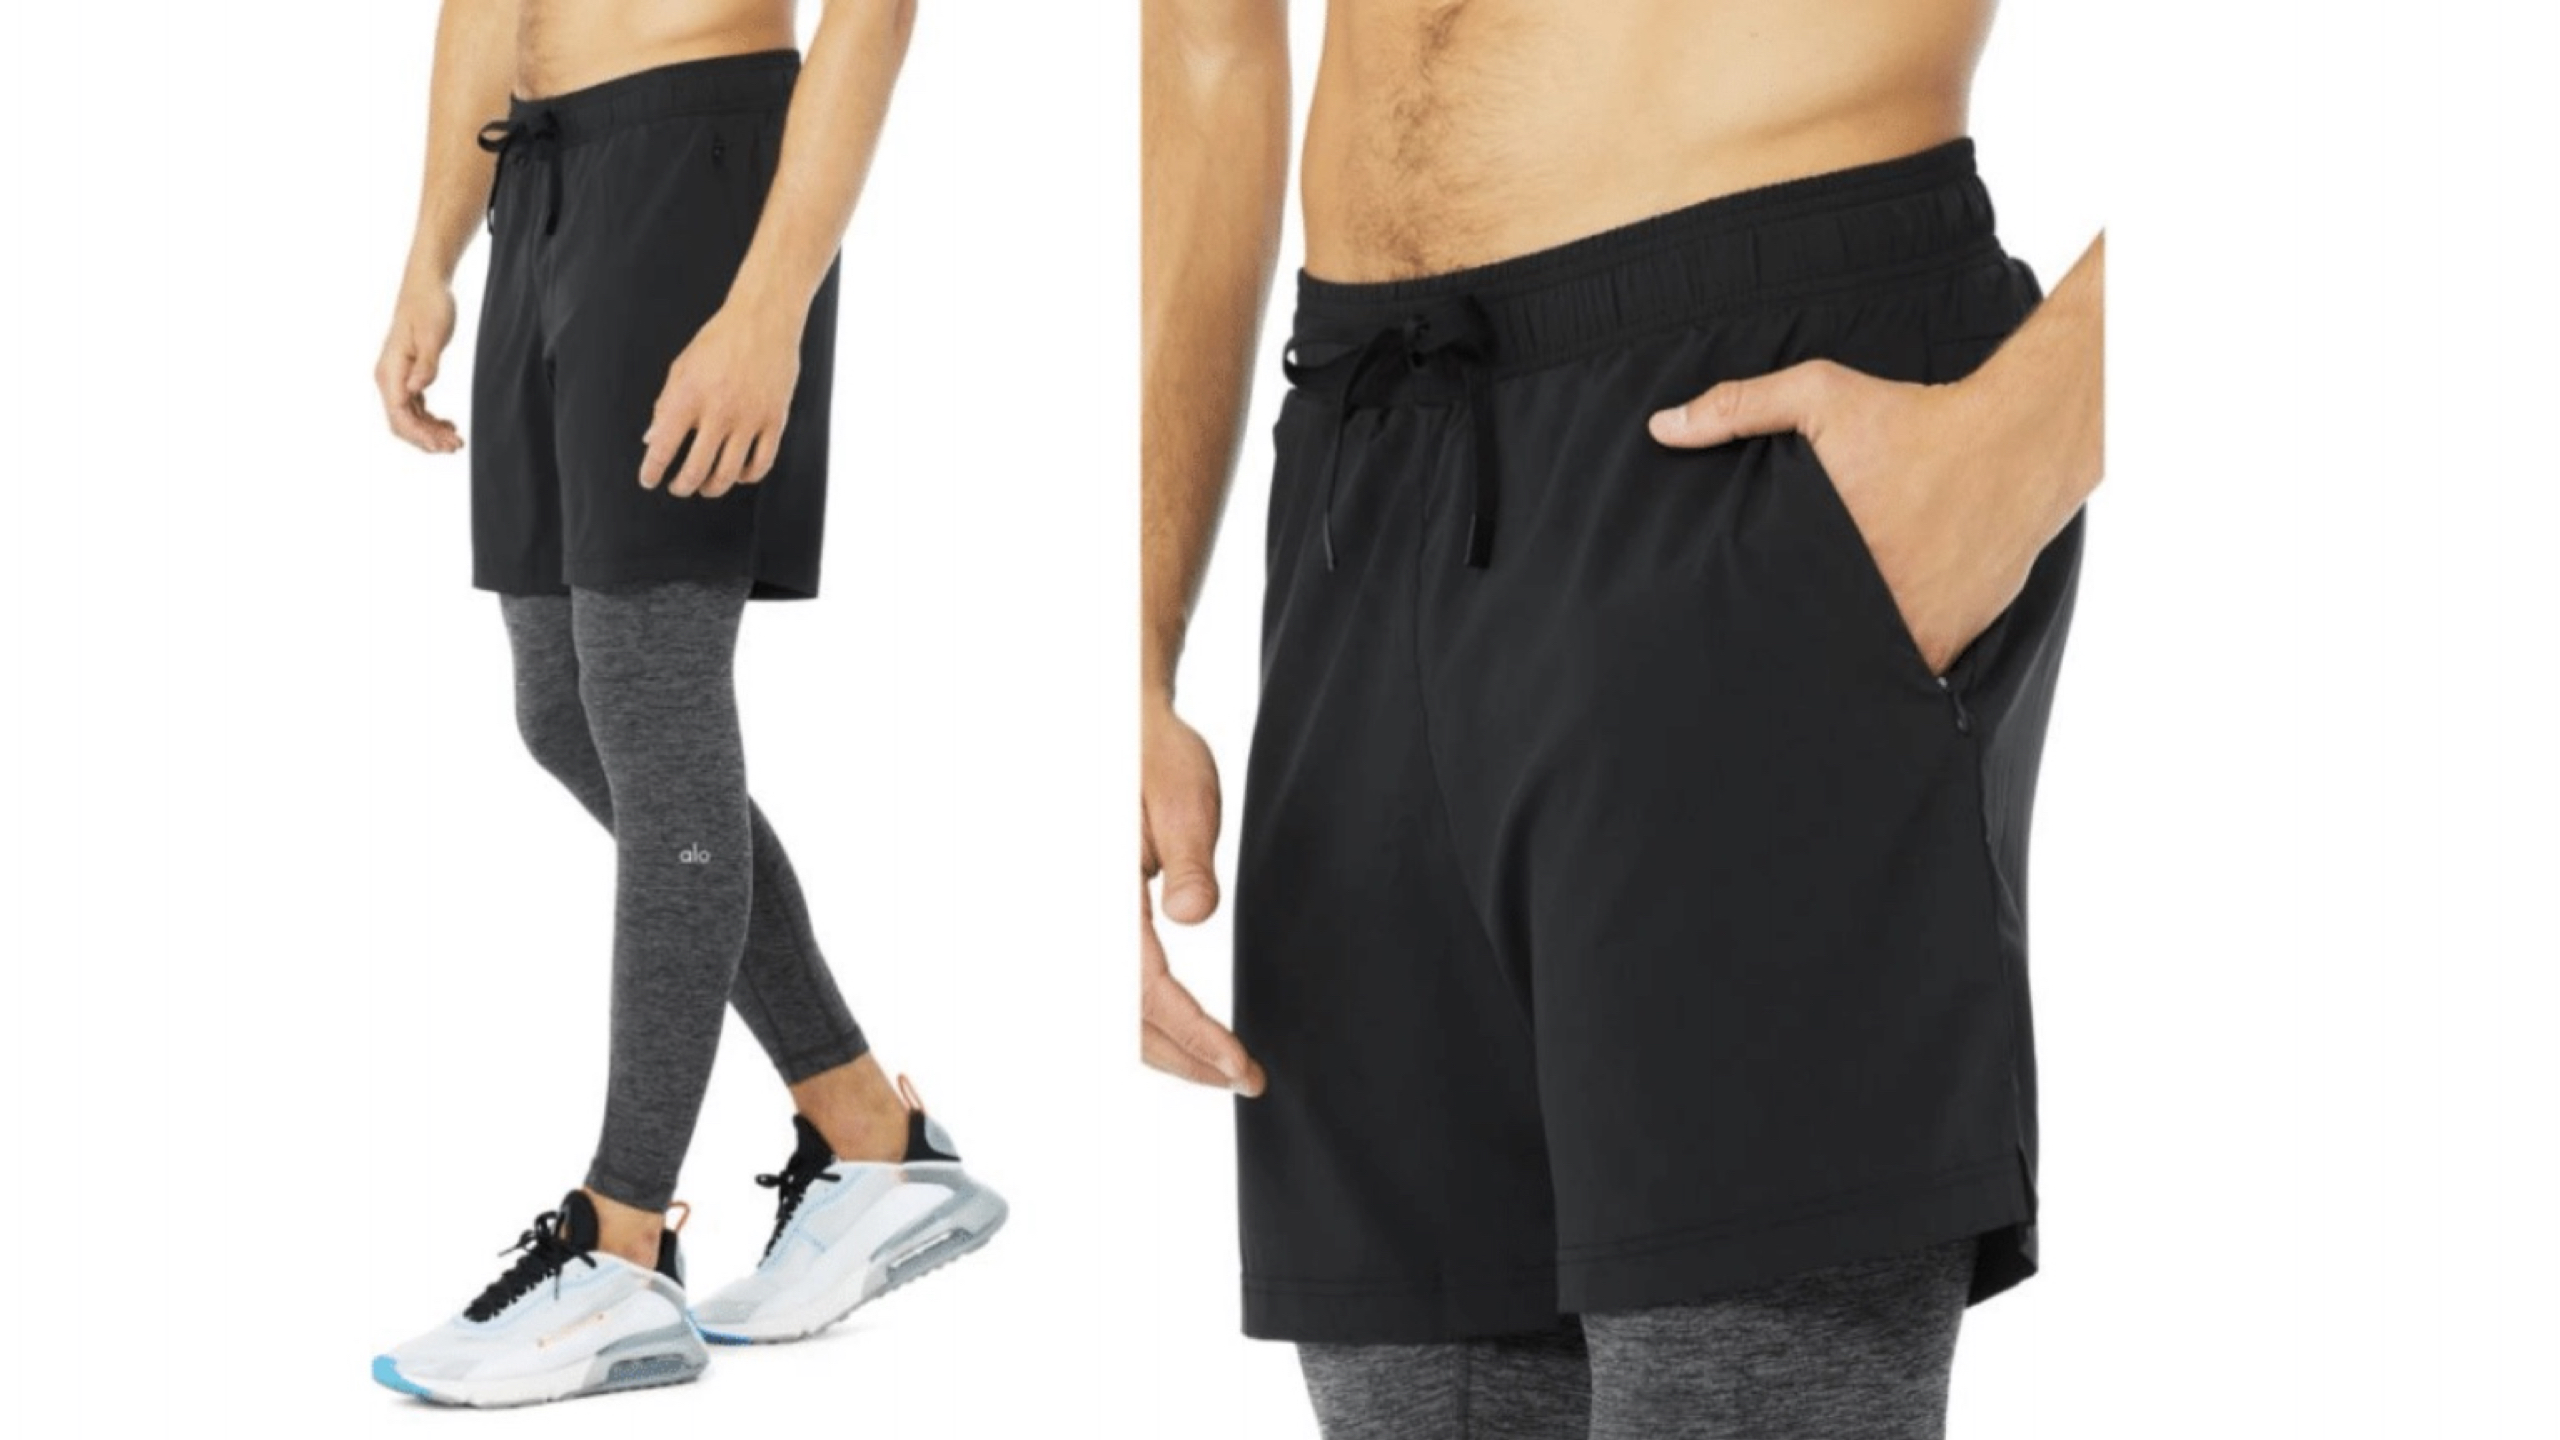 2-in-1 shorts and pants